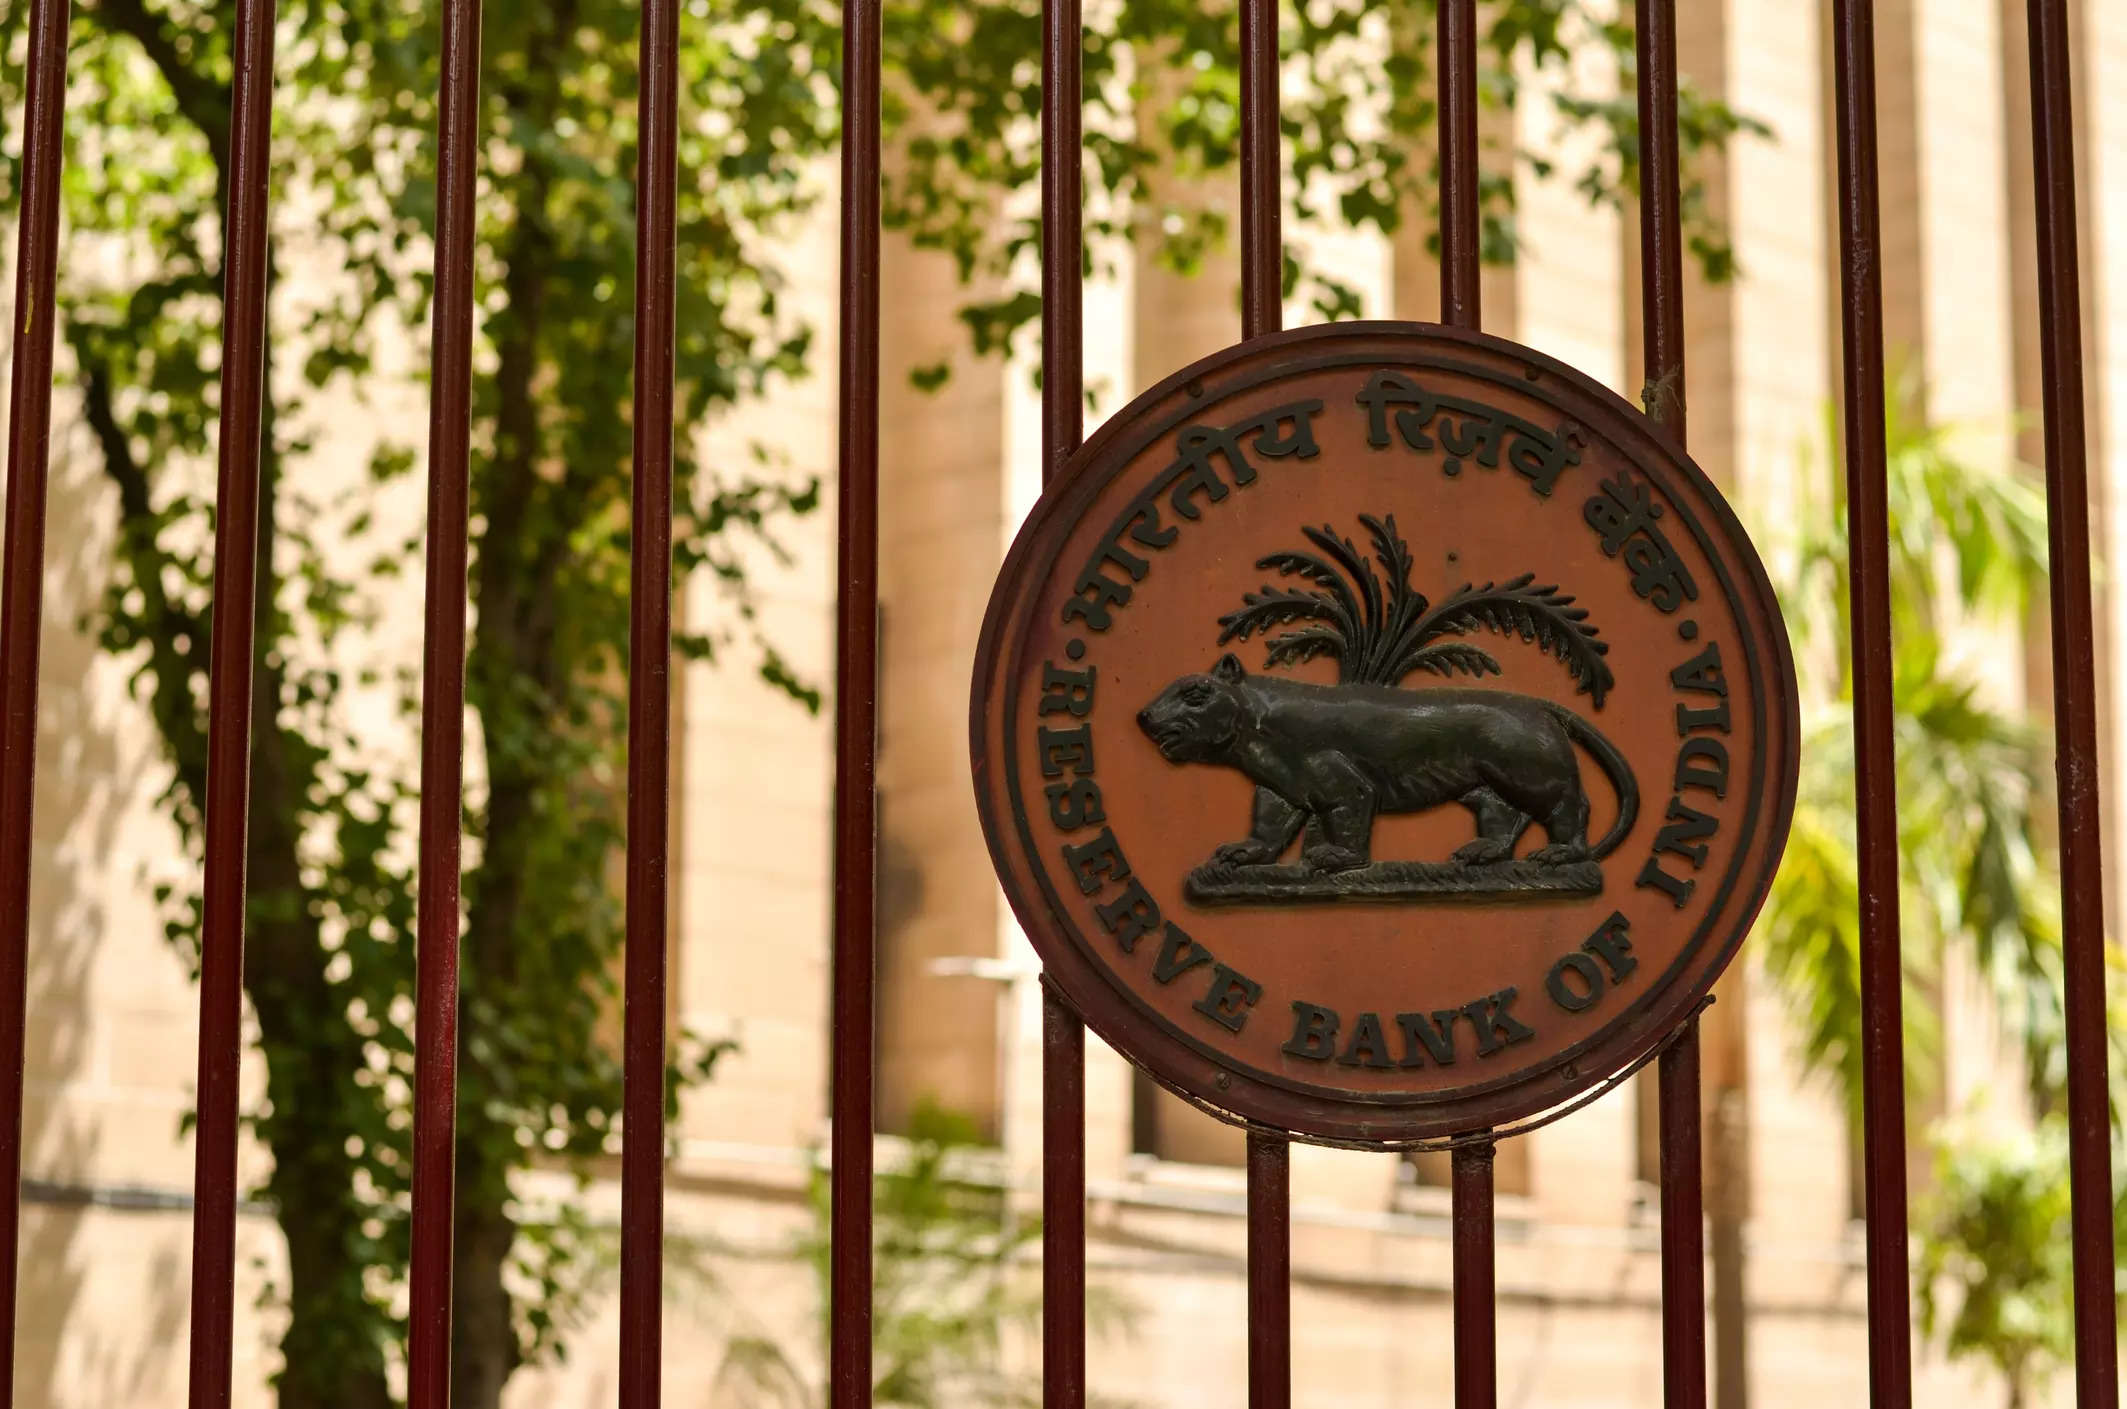 The Confederation of Indian Industries (CII) and the Associated Chambers of Commerce and Industry of India (Assocham) are writing to the regulator to review the norm which asks NFBCs to classify loans based on daily repayments.